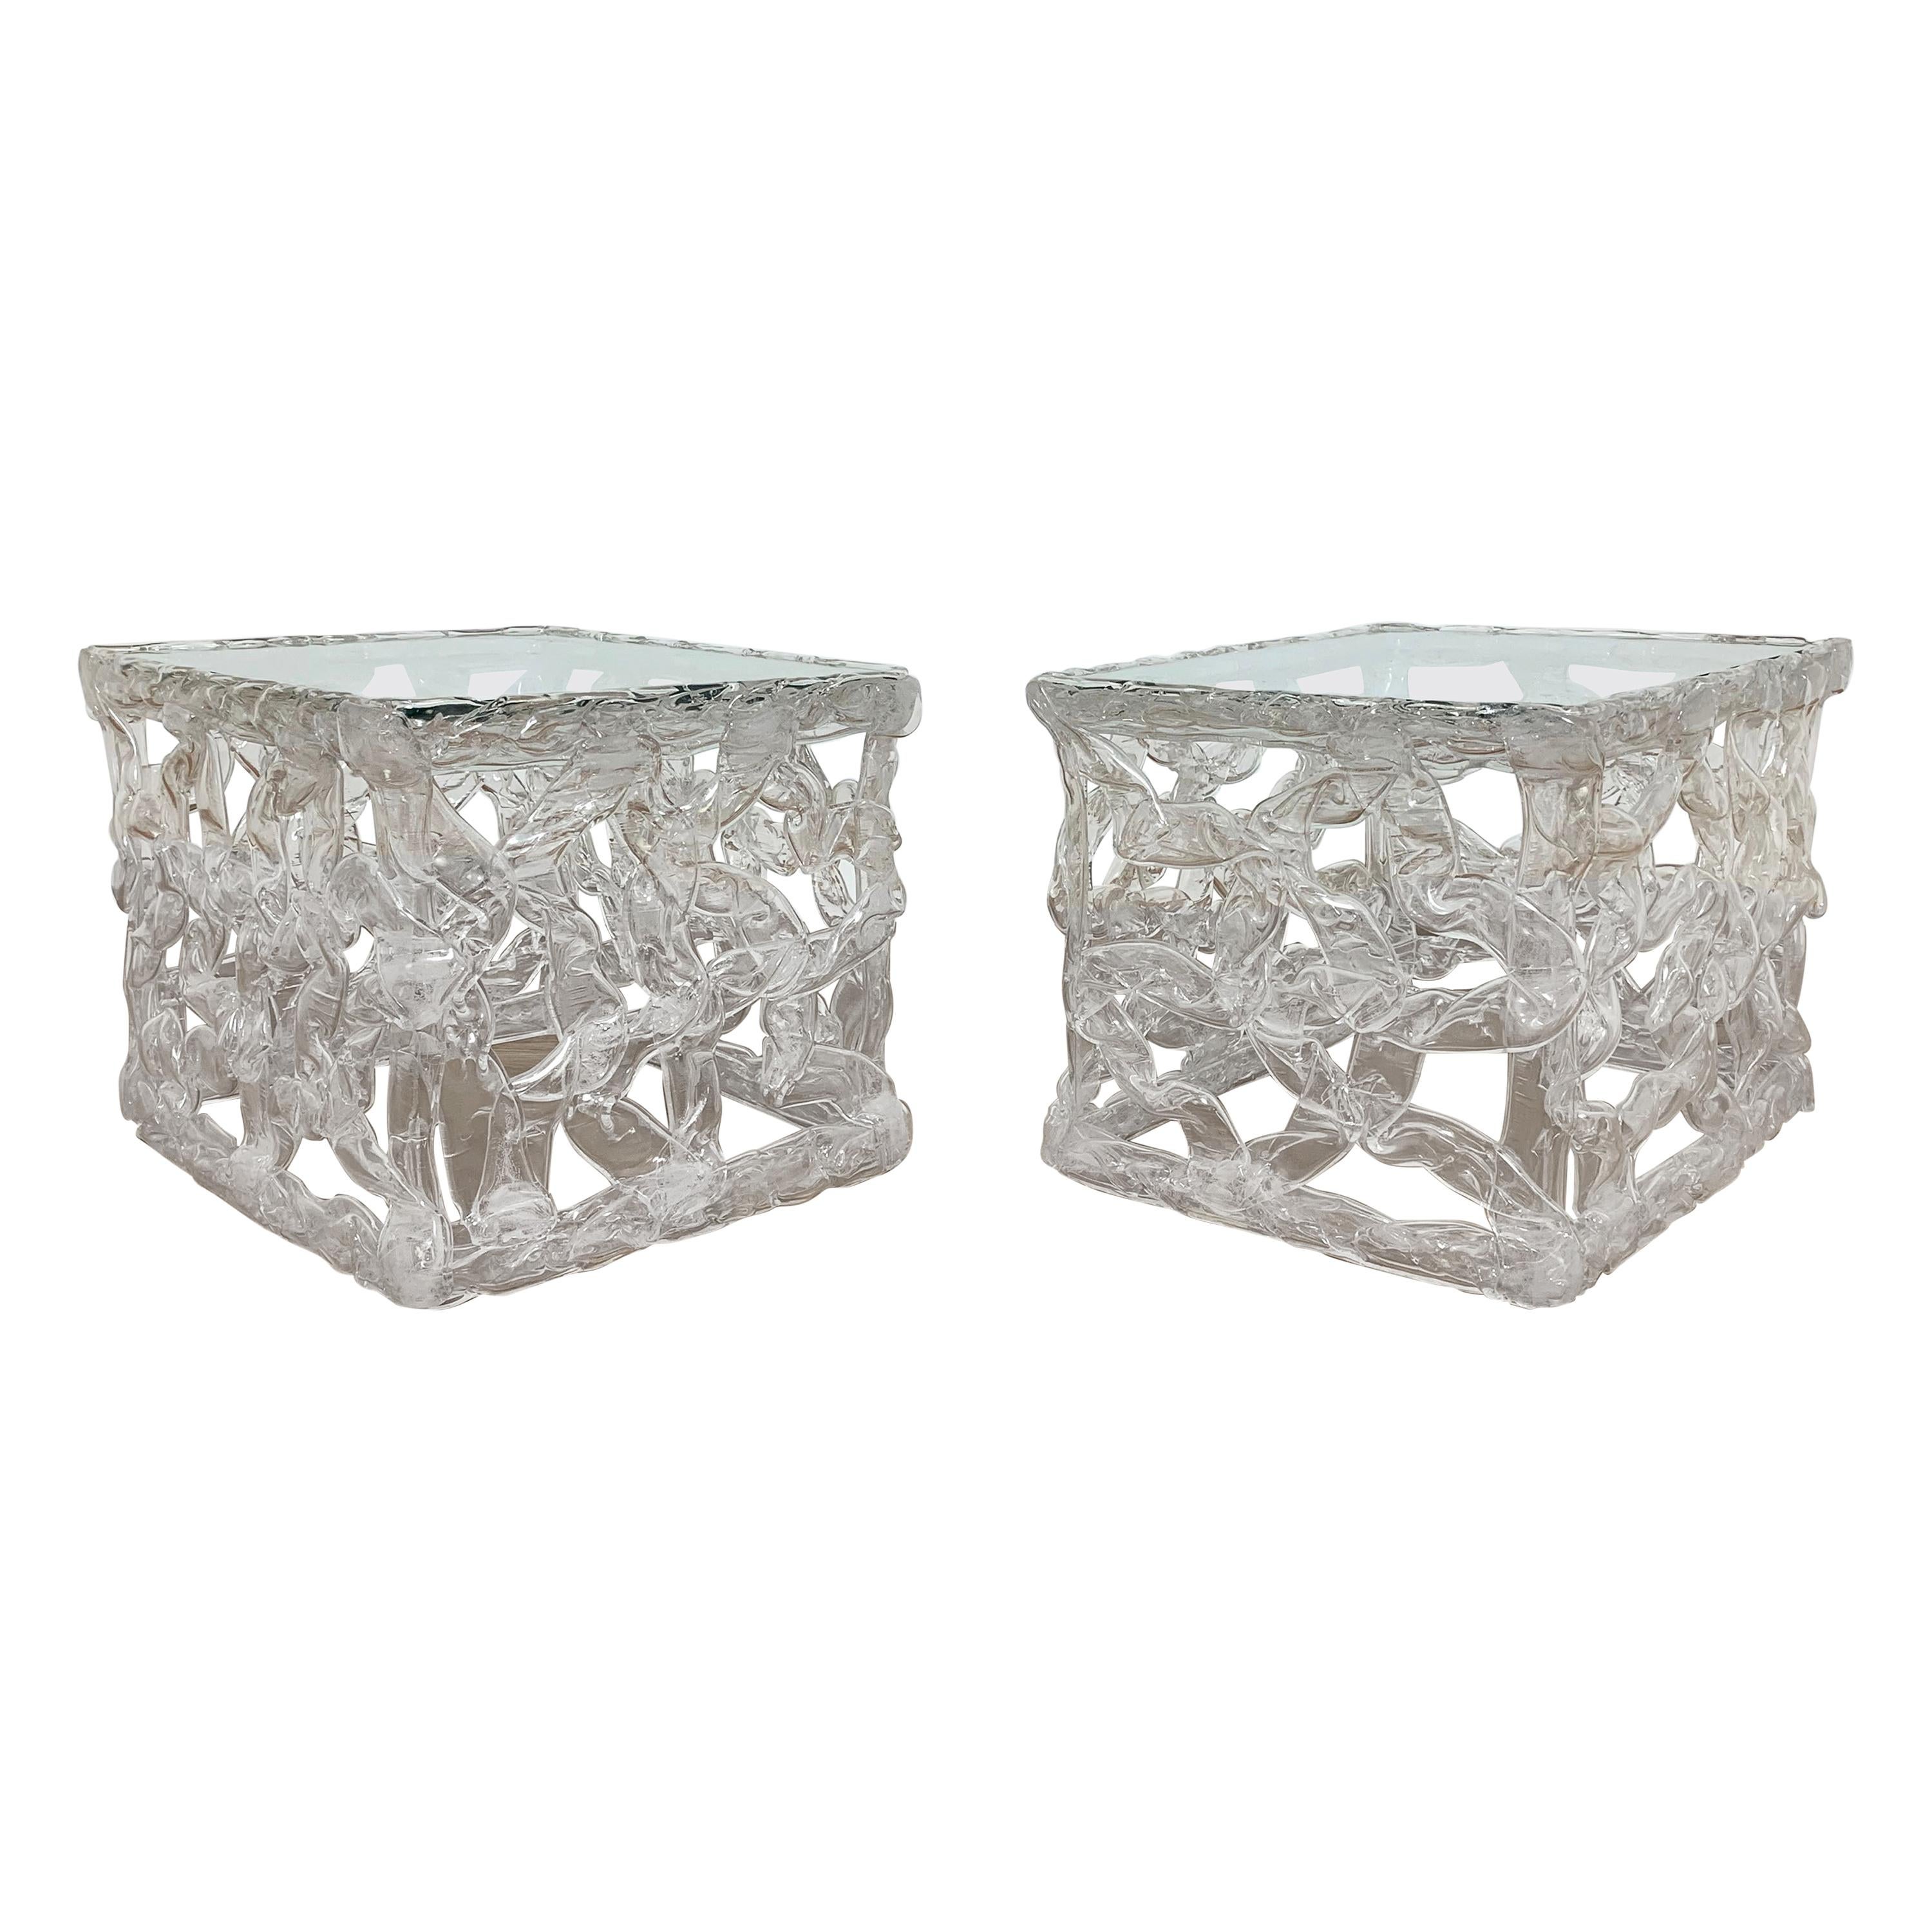 Pair of Tony Duquette Style Clear Acrylic "Taffy Pull" End Tables, Ca. 1970s